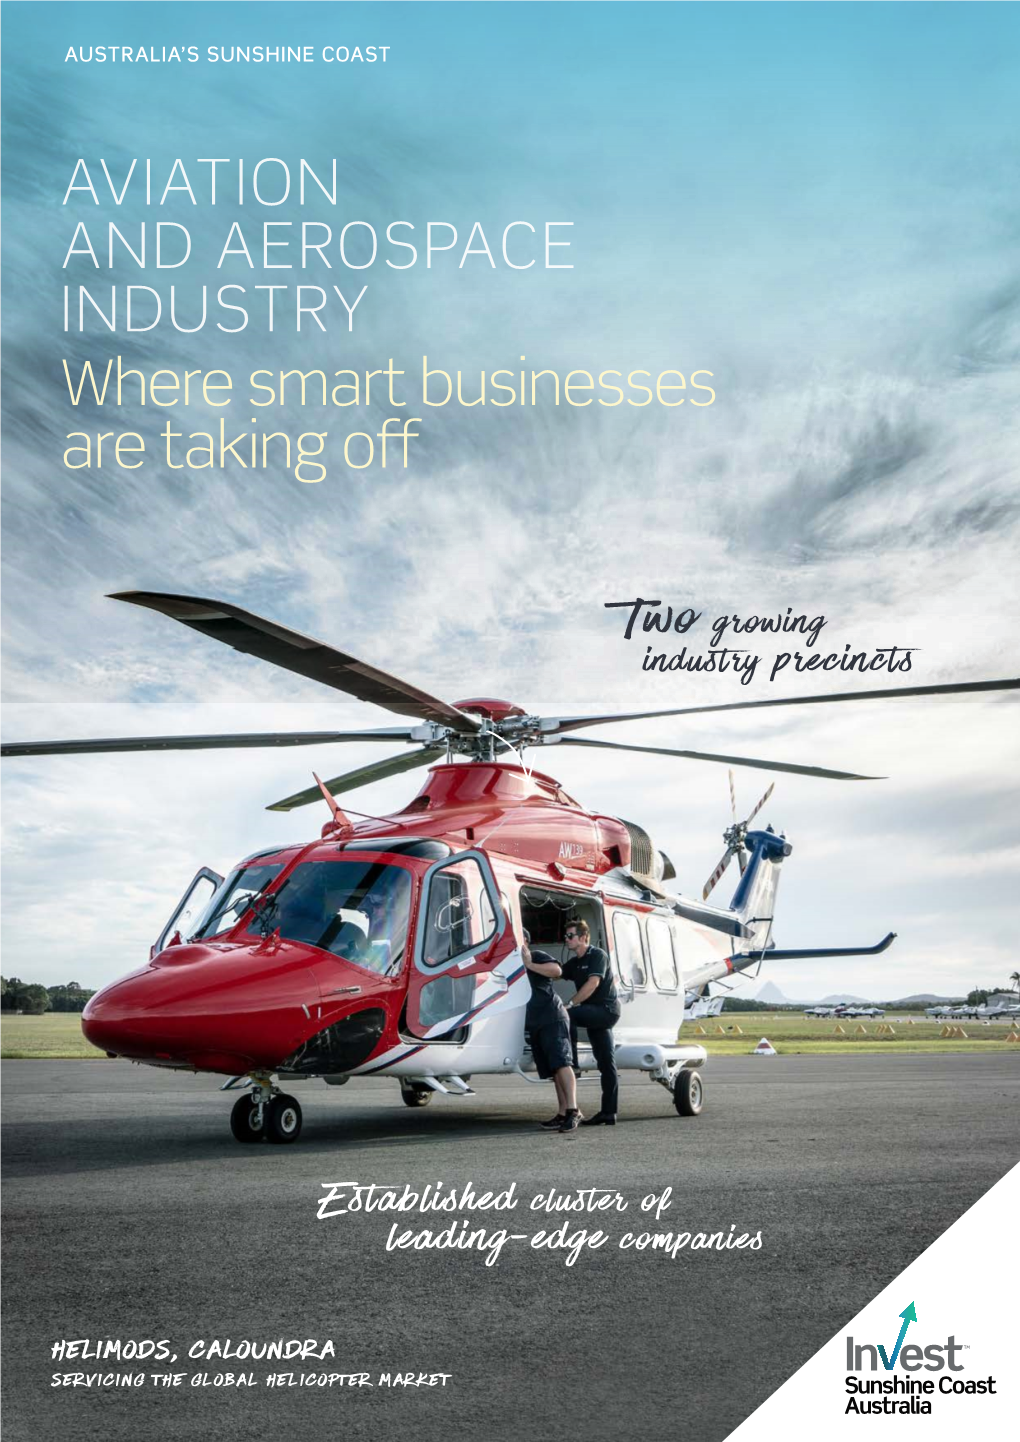 Aviation and Aerospace Industry Brochure